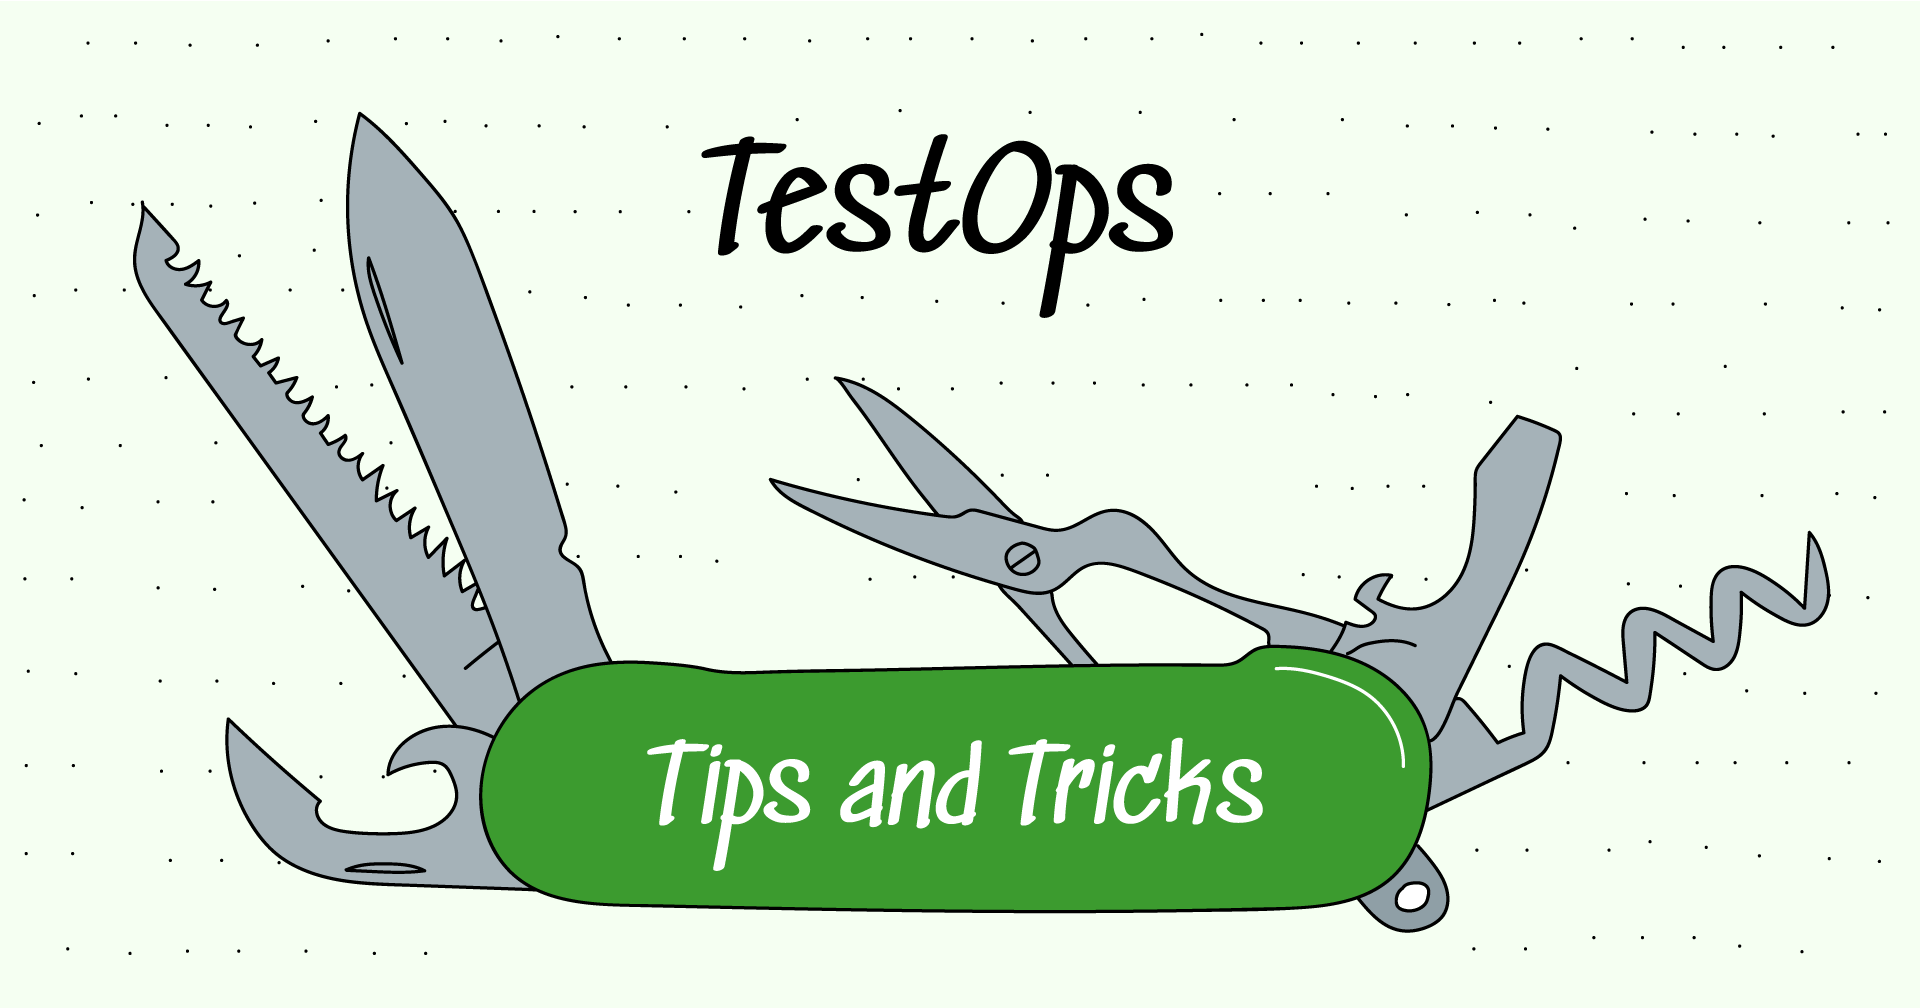 How to Enhance Productivity of TestOps Teams: Best Tips and Tricks